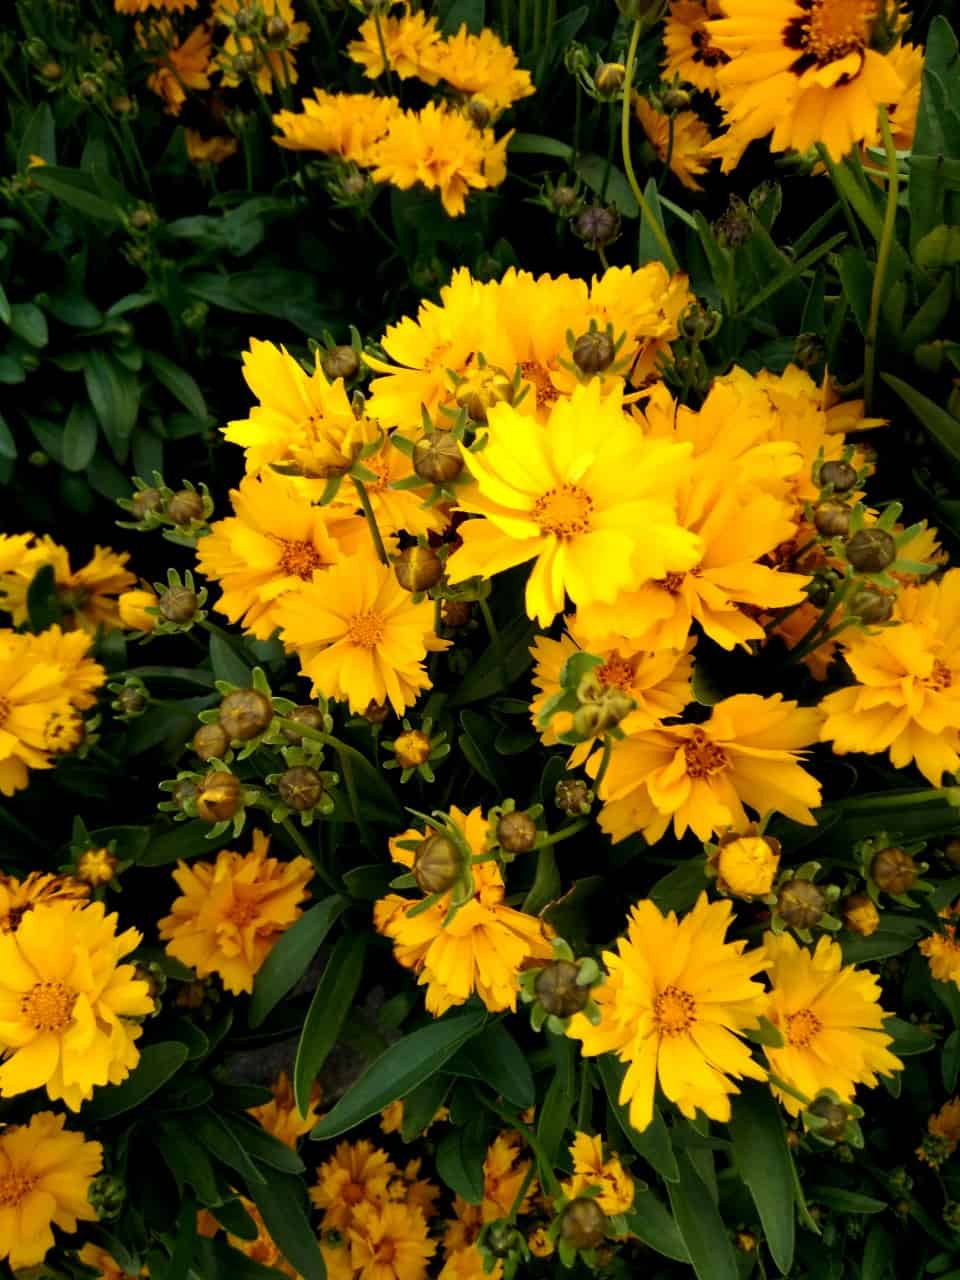 coreopsis offers profuse numbers of blooms during the growing season